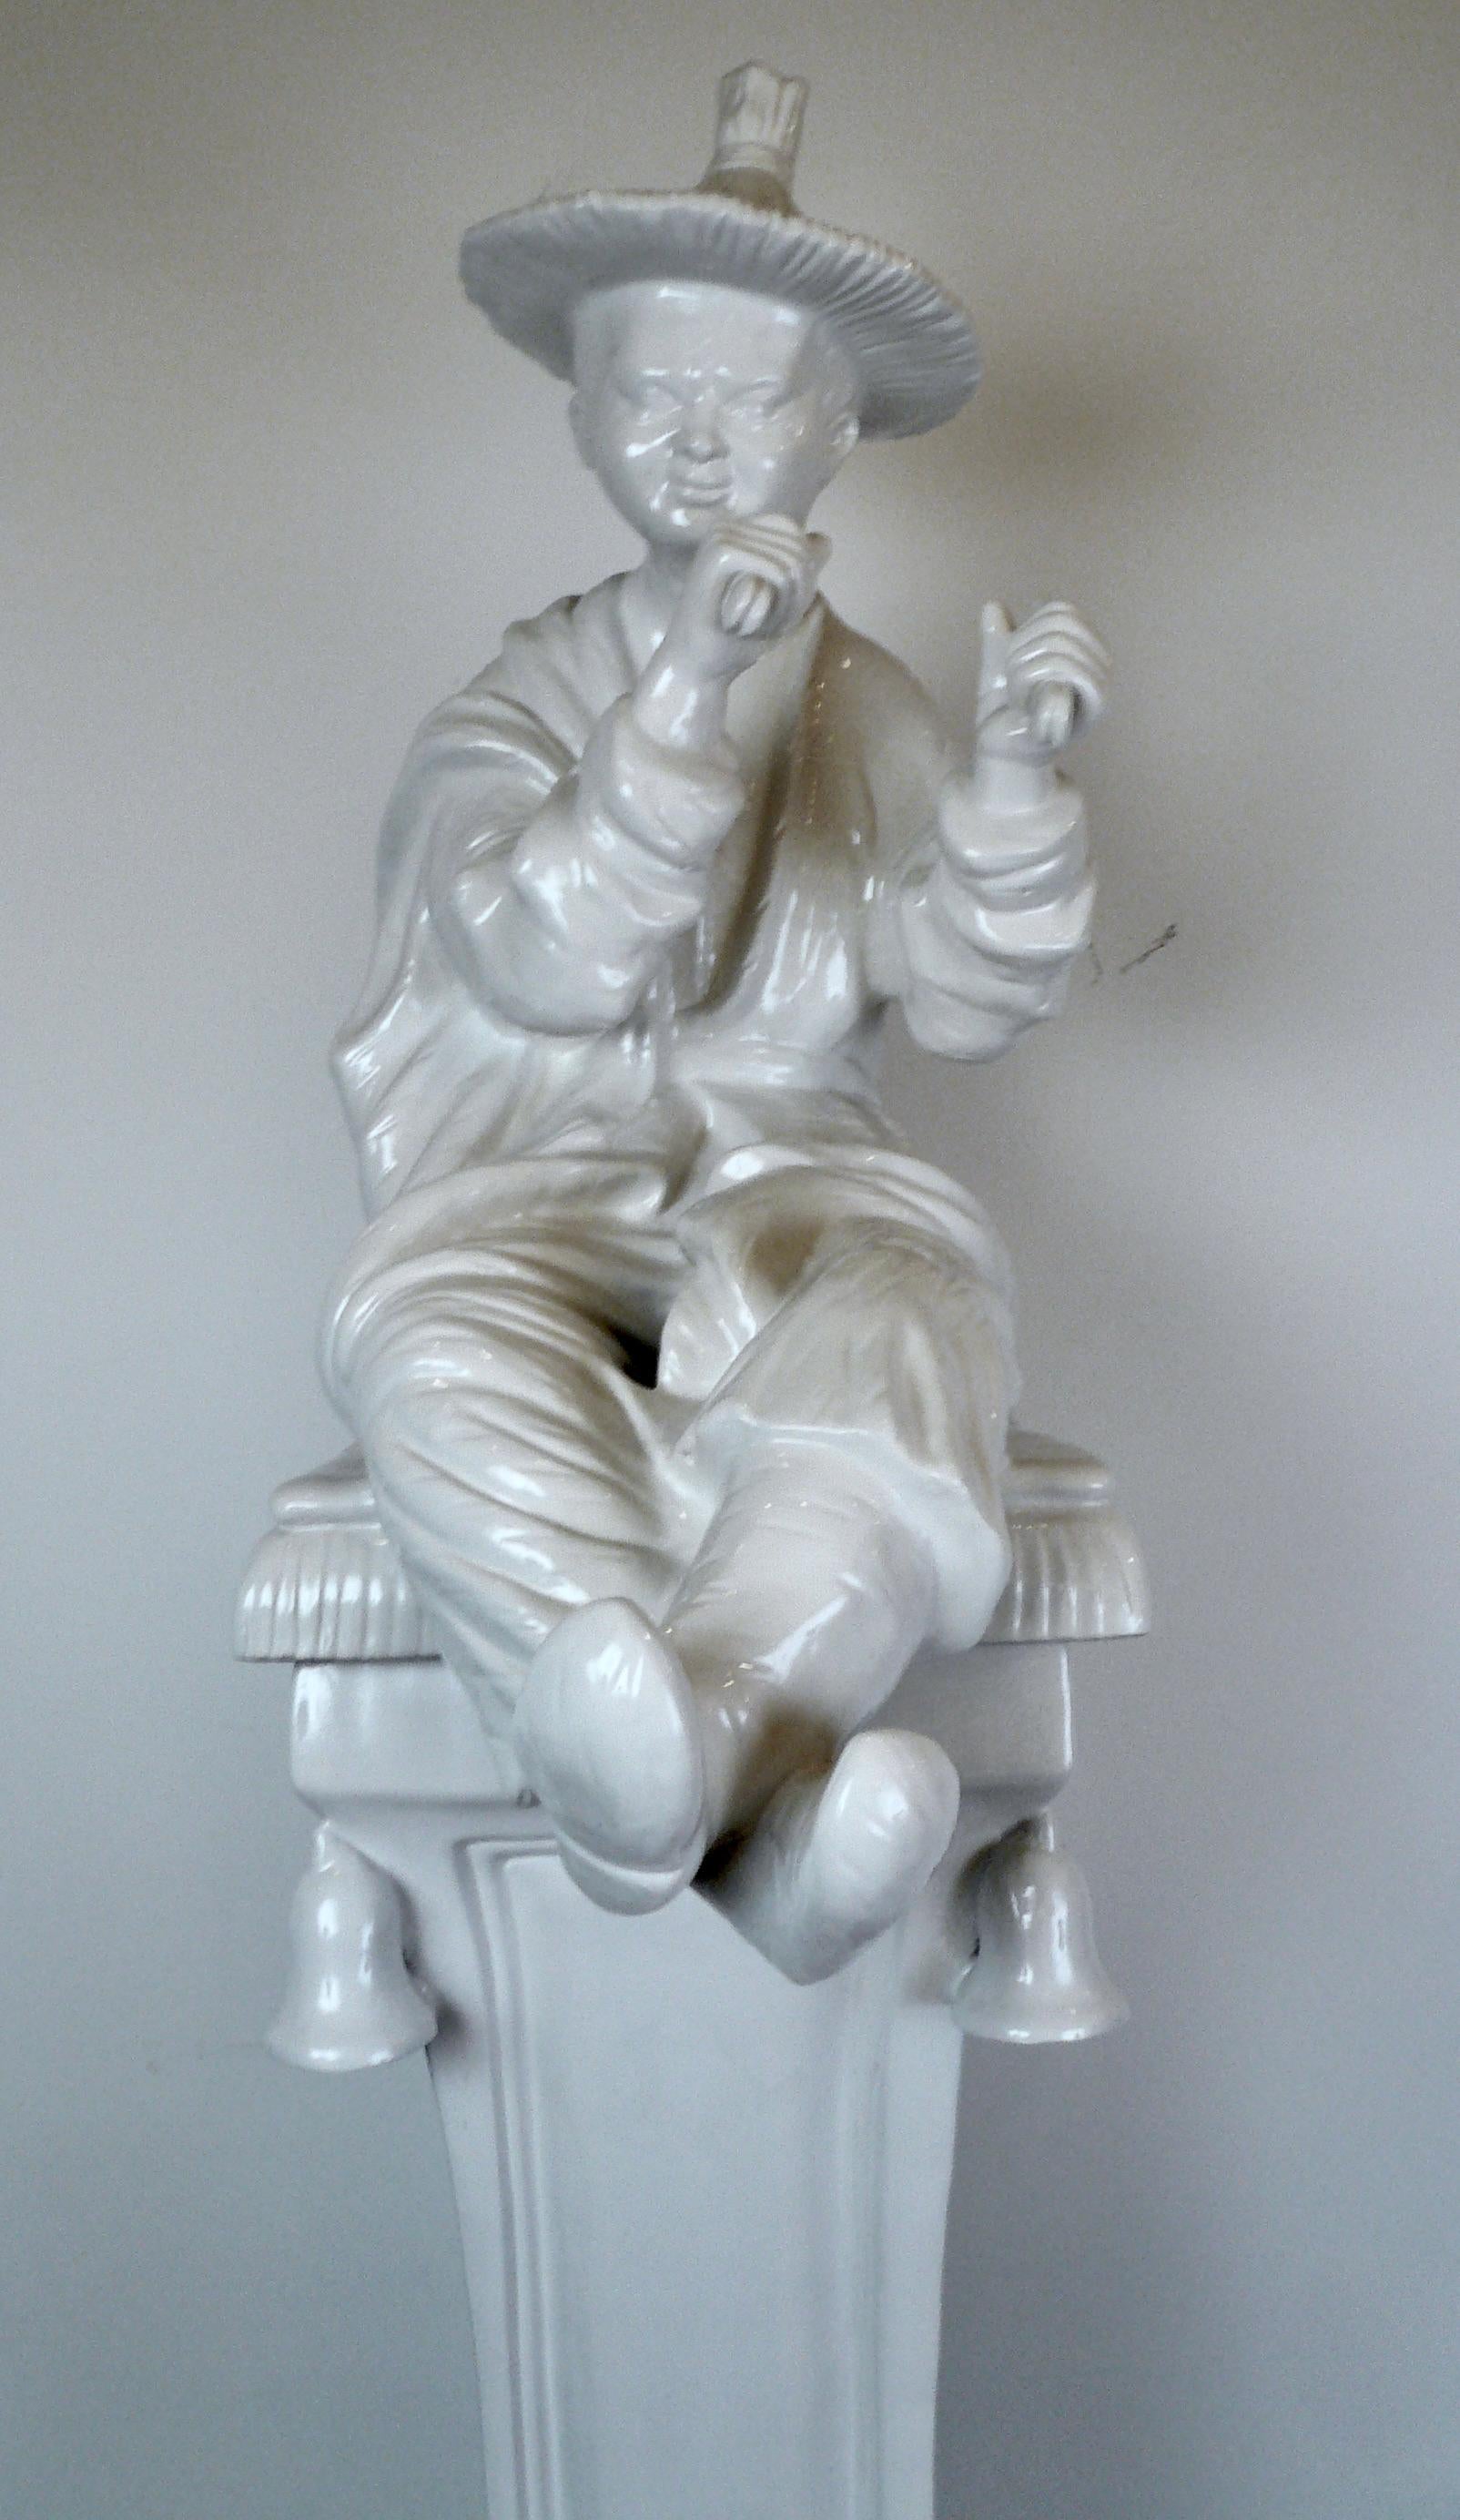 Chinoiserie Large Ceramic Blanc de Chine Figure of a Chinese Musician on Pedestal